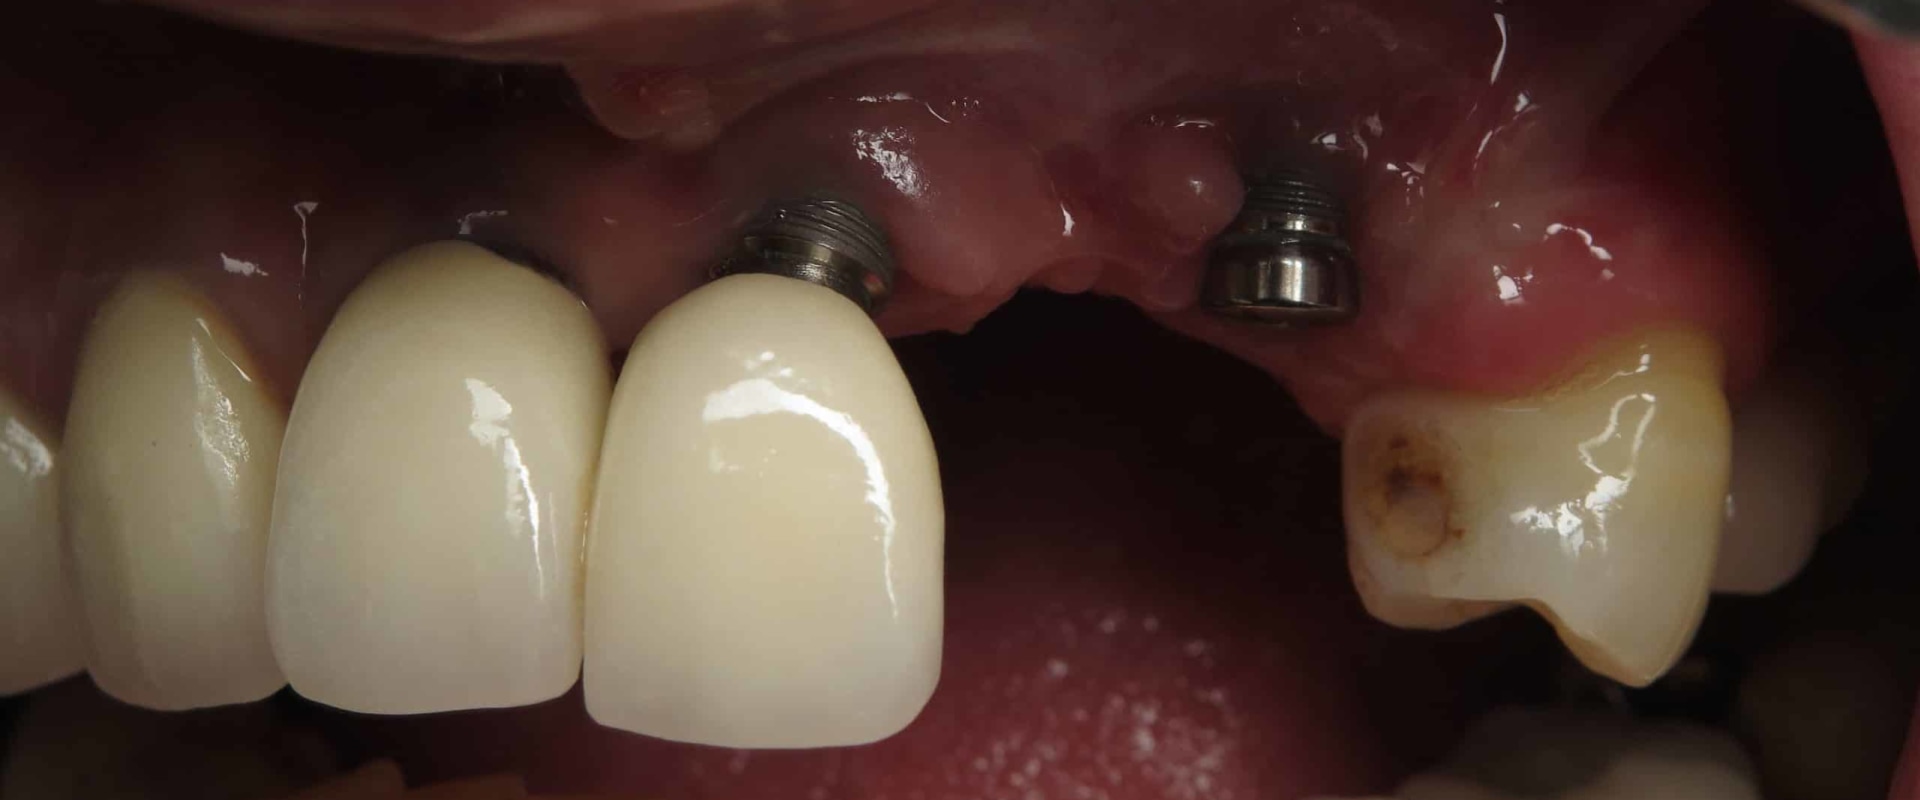 What to Do When a Dental Implant Fails